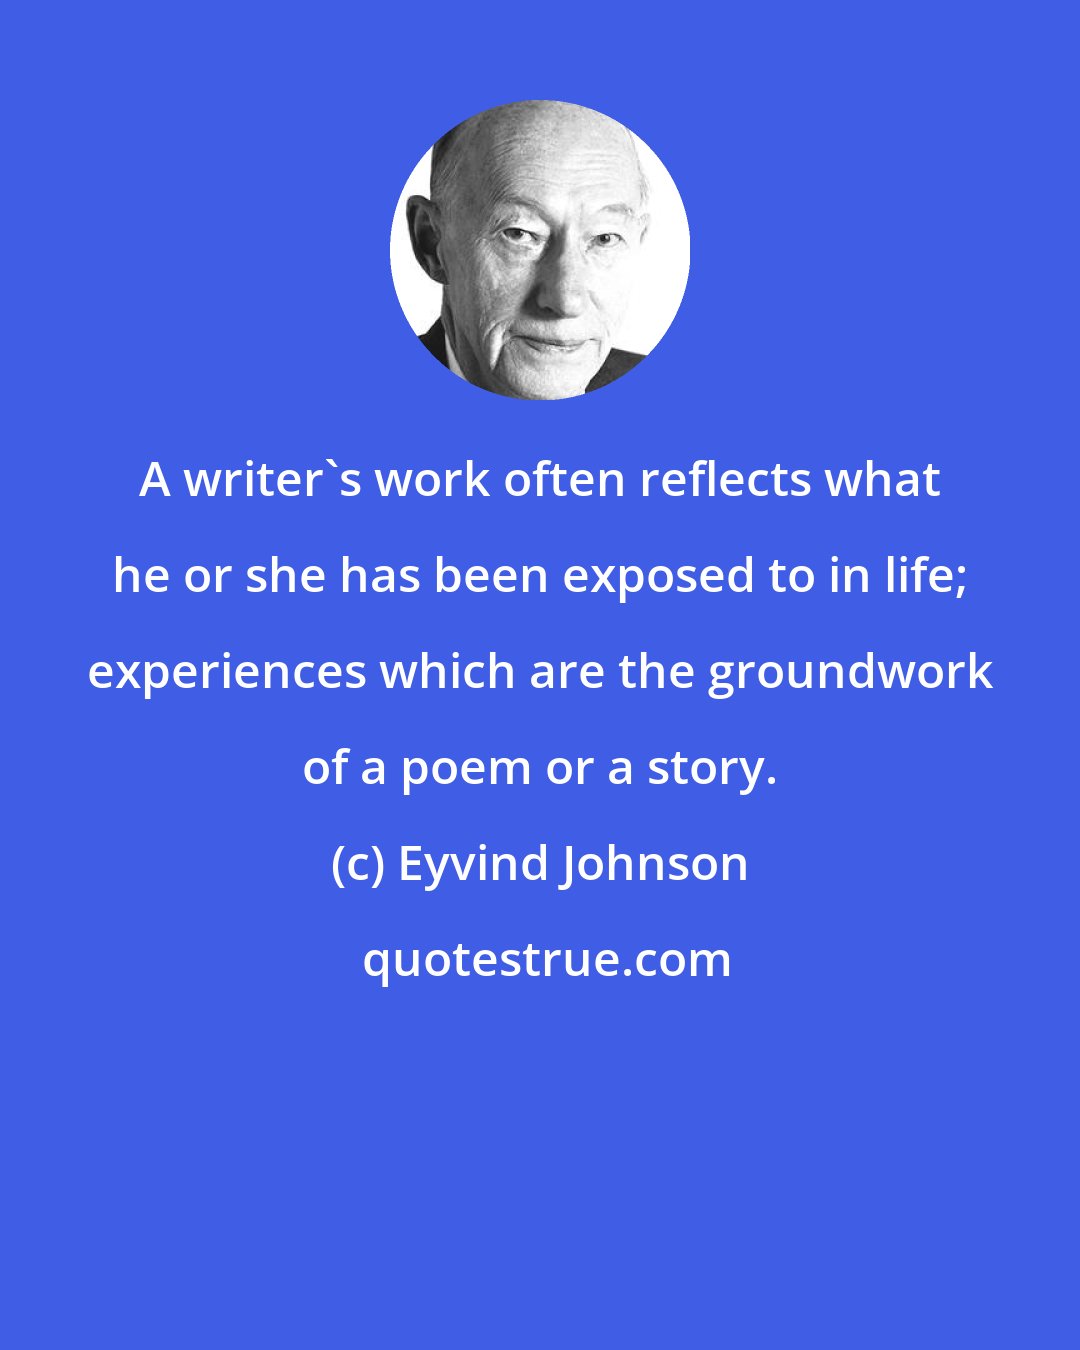 Eyvind Johnson: A writer's work often reflects what he or she has been exposed to in life; experiences which are the groundwork of a poem or a story.